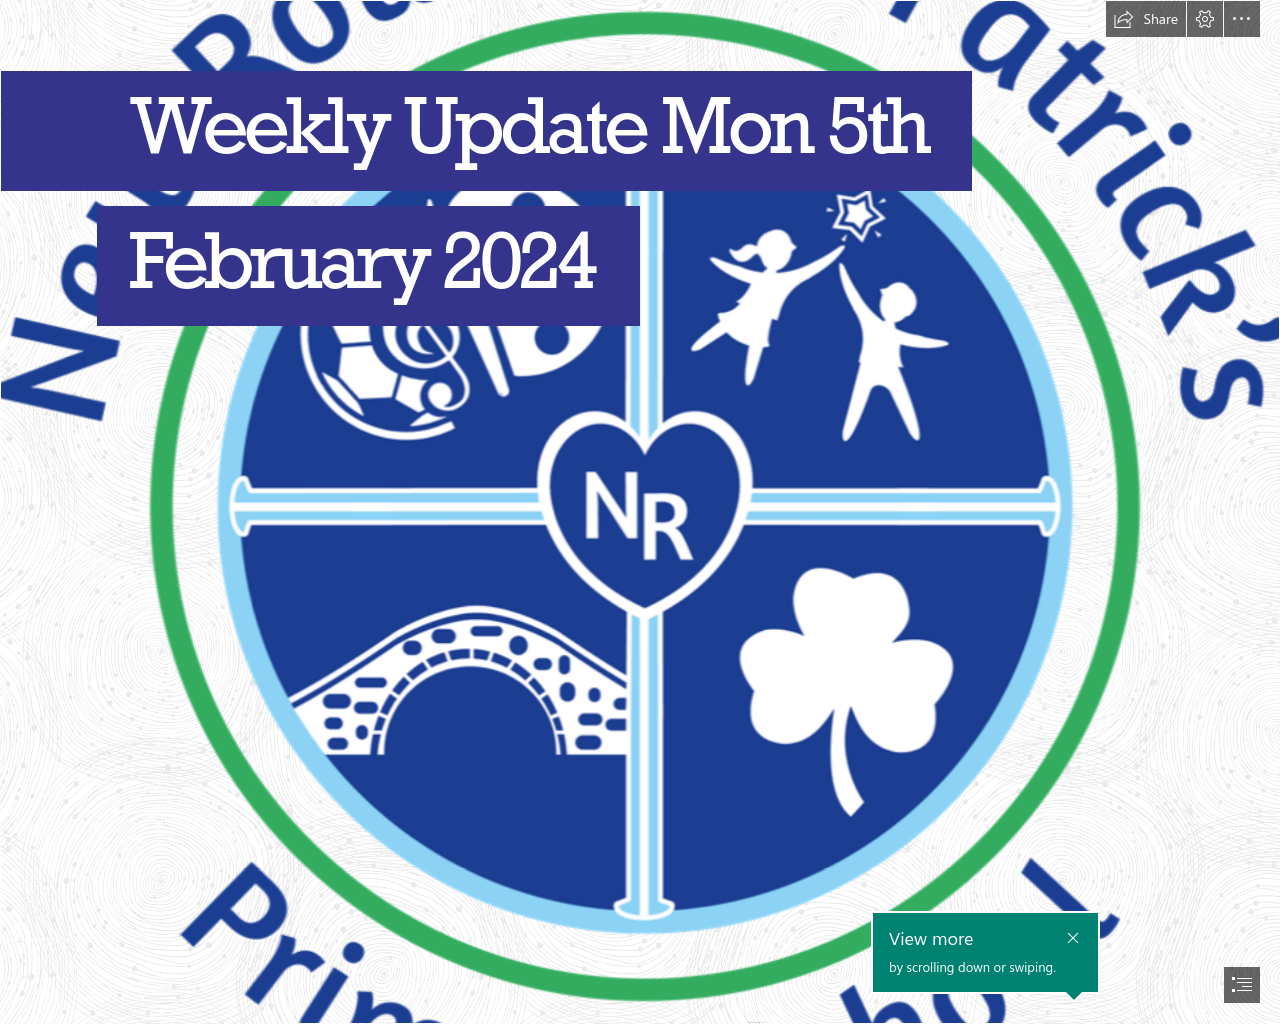 Weekly Update Monday 5th February 2024